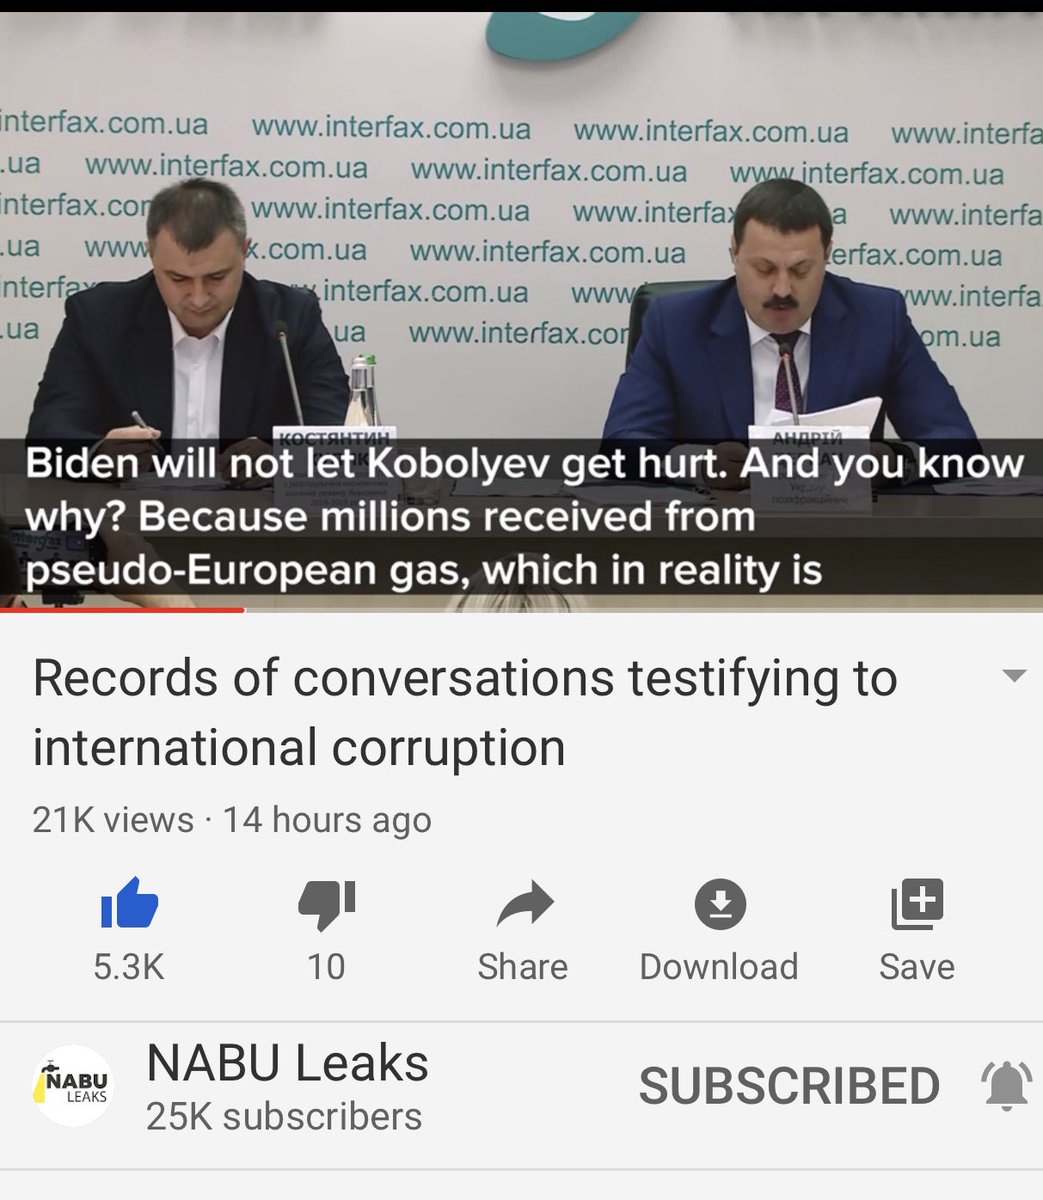 Here’s the portion the Biden call where he outlines that Biden is the Lord and master and the Ukrainians are his vassals. He then discussed how Biden is protecting g Kobolyev because he’s who helps funnel/launder the money frm the pseudo gas companies. Last pic is the cost of it